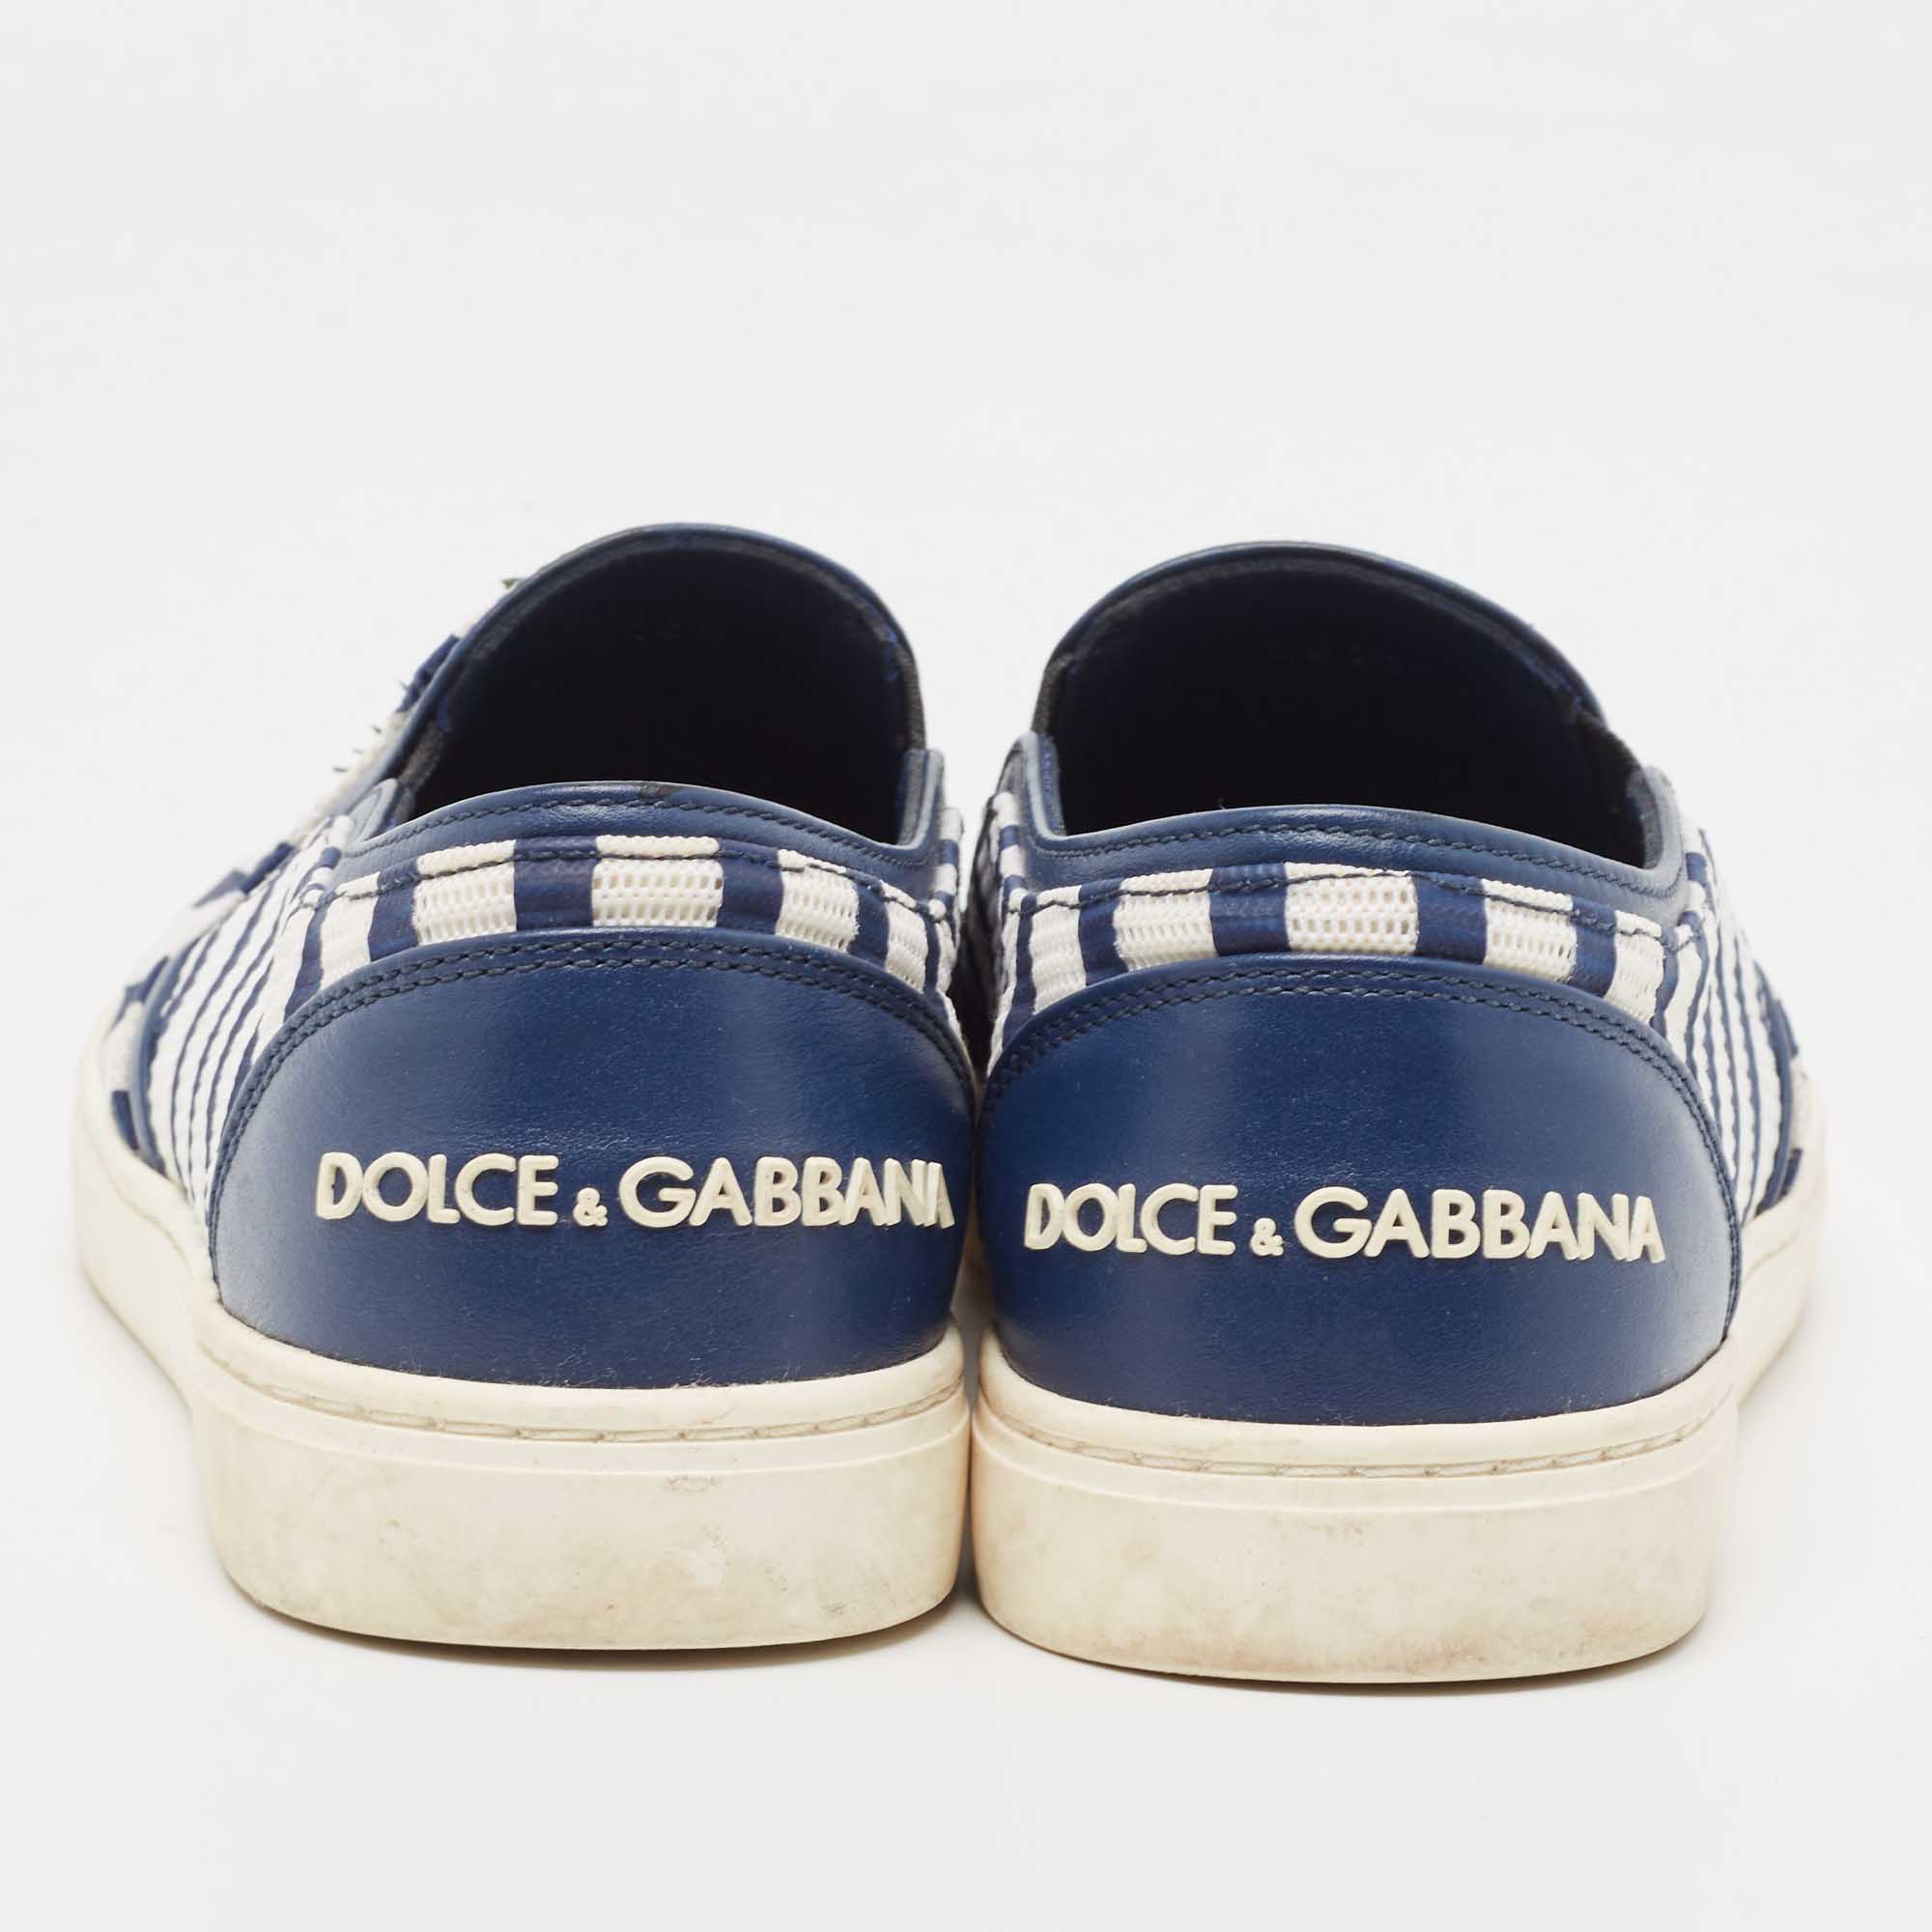 Dolce & Gabbana White/Navy Blue Canvas And Fabric Low Top Sneakers Size 37.5